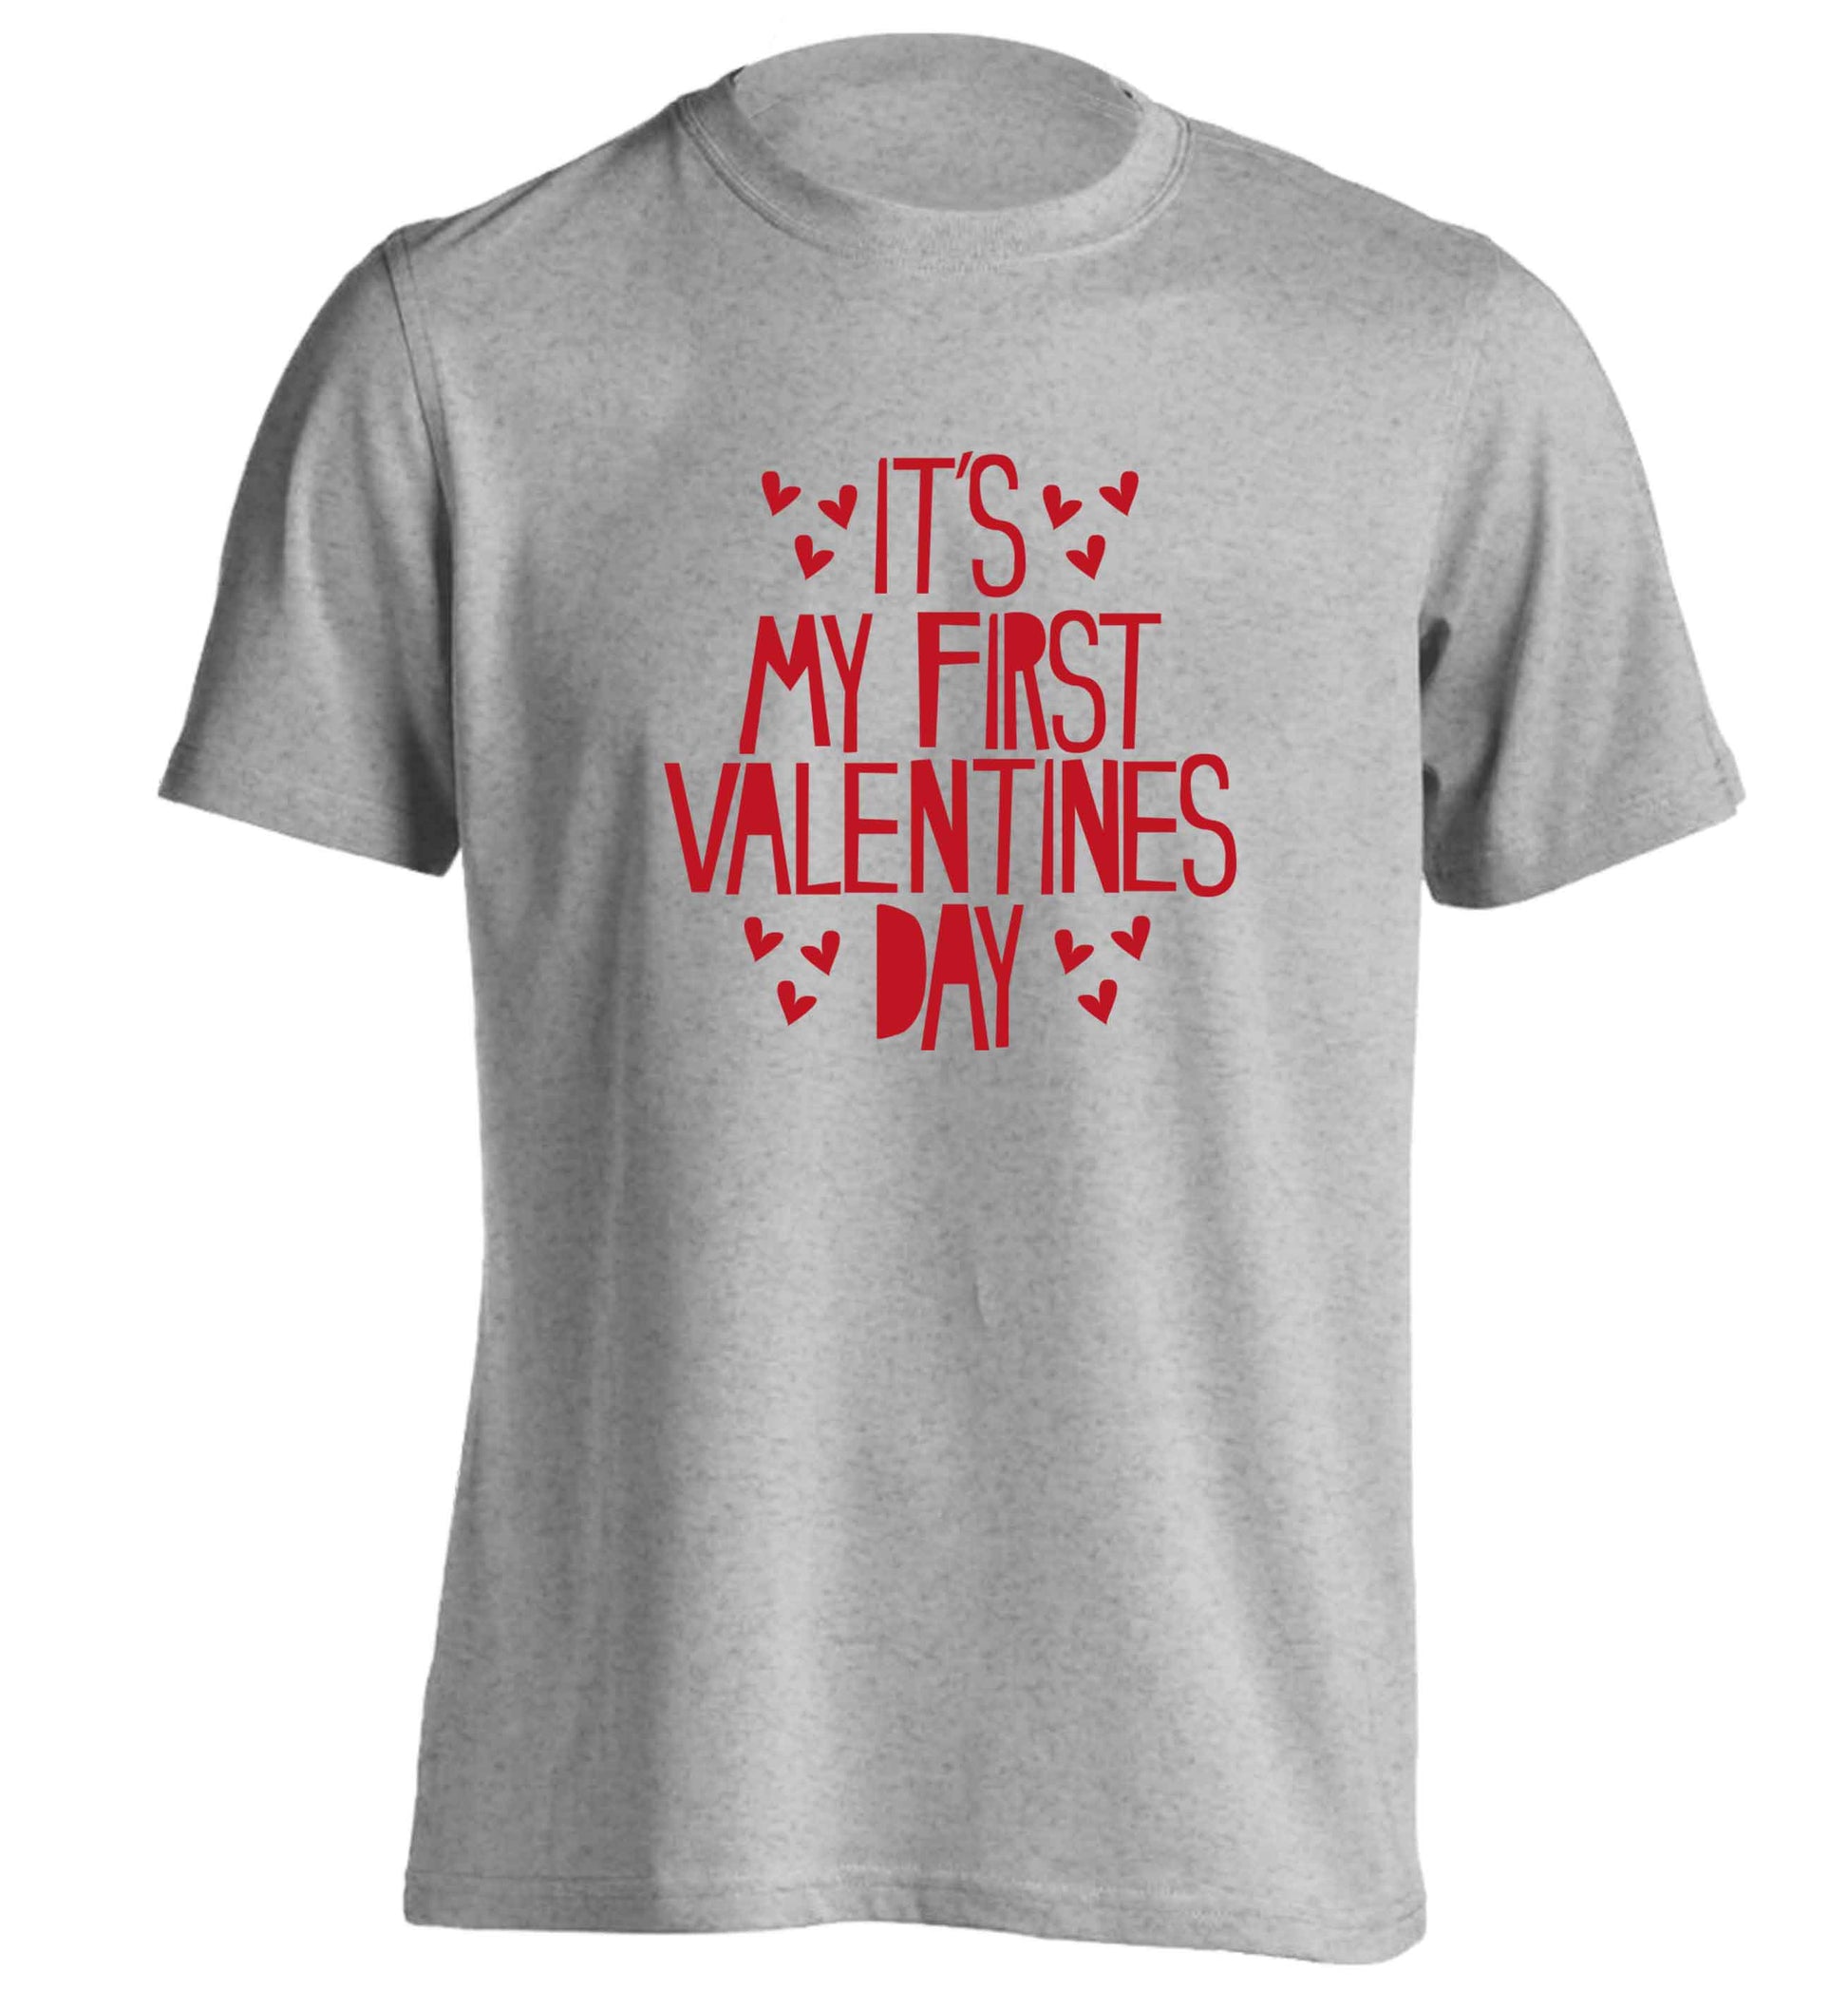 Hearts It's my First Valentine's Day adults unisex grey Tshirt 2XL